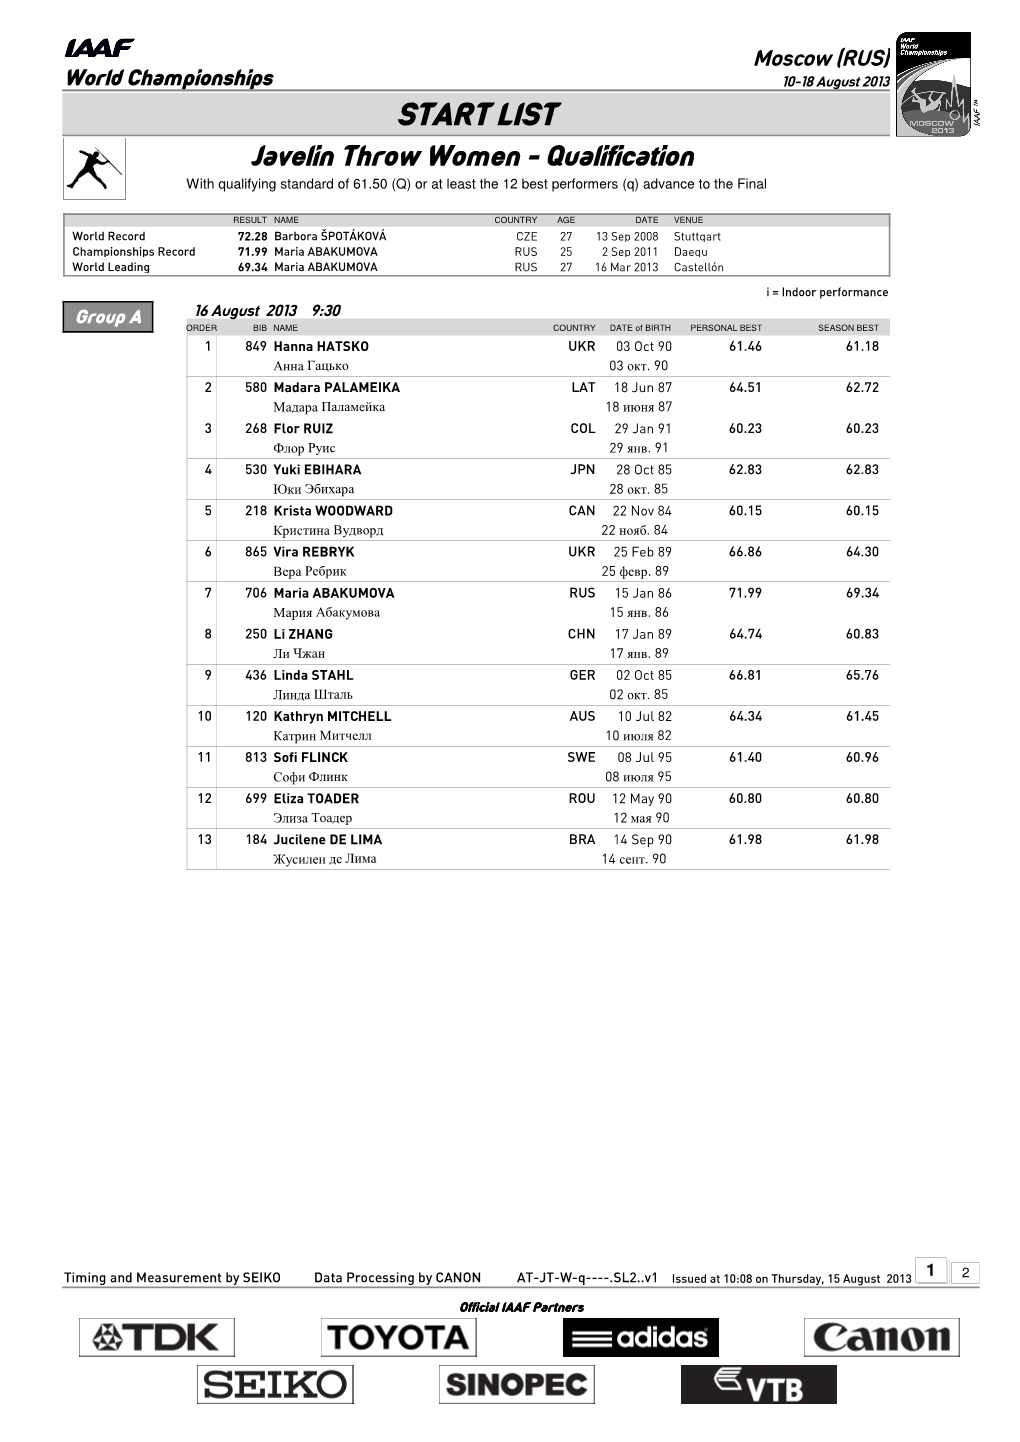 START LIST Javelin Throw Women - Qualification with Qualifying Standard of 61.50 (Q) Or at Least the 12 Best Performers (Q) Advance to the Final